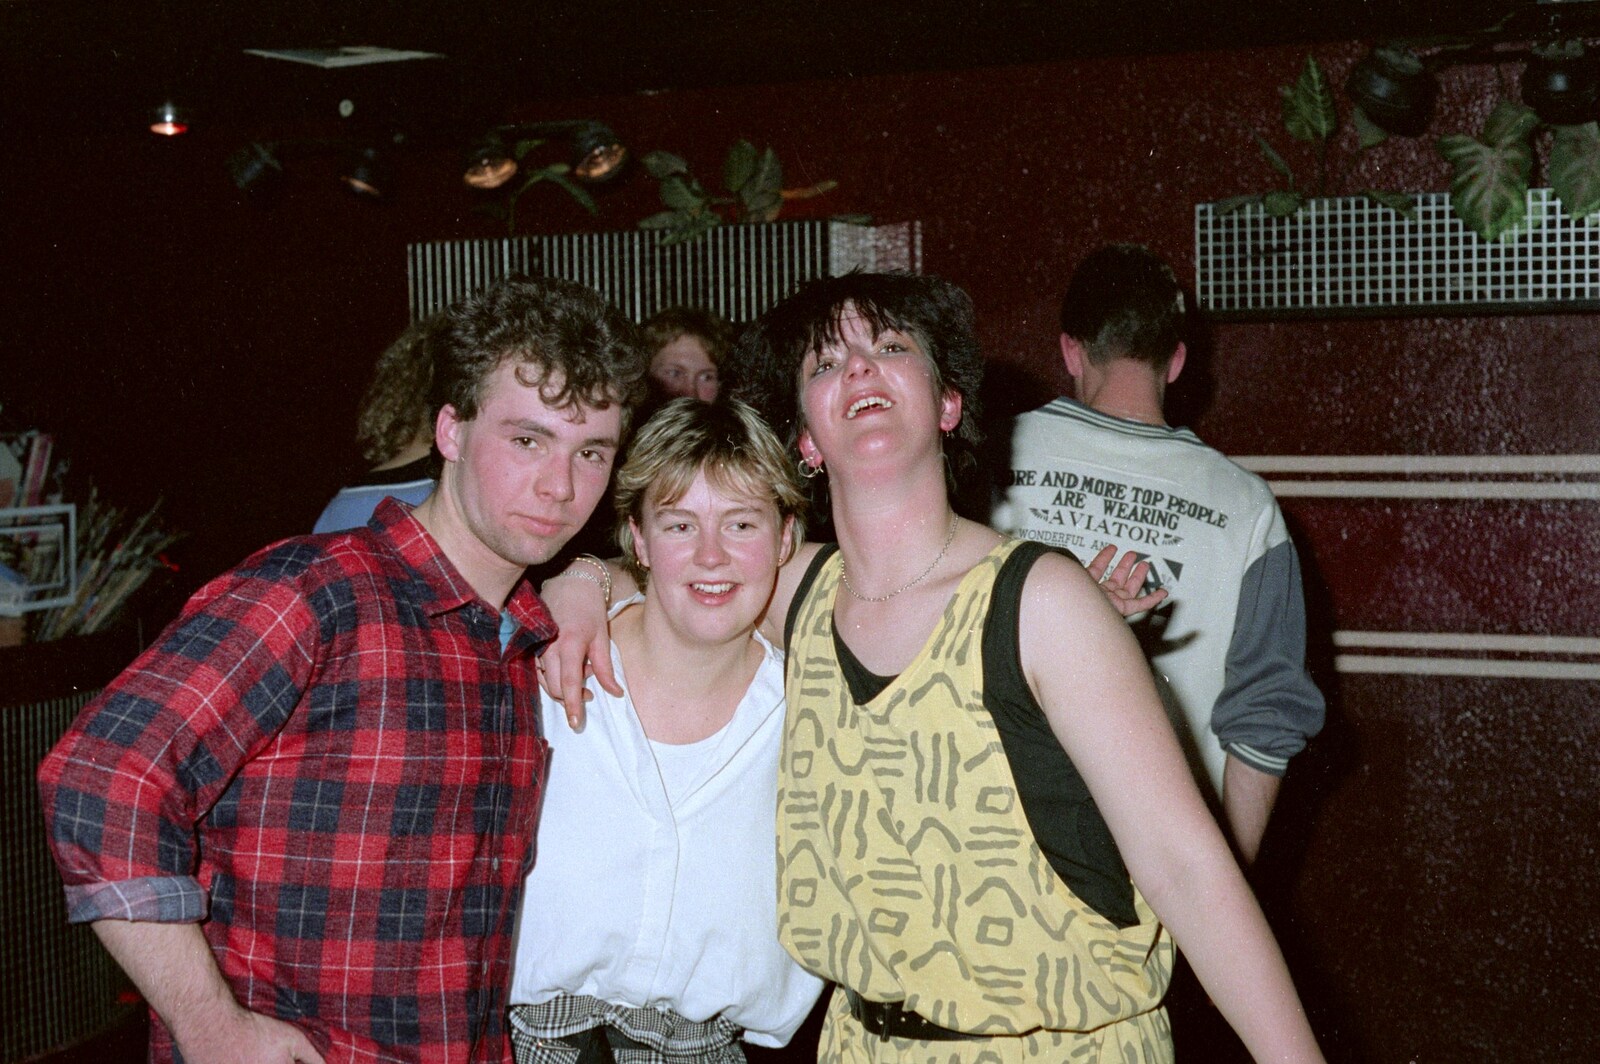 More party posing from Uni: A Party in Snobs Nightclub, Mayflower Street, Plymouth - 18th October 1986